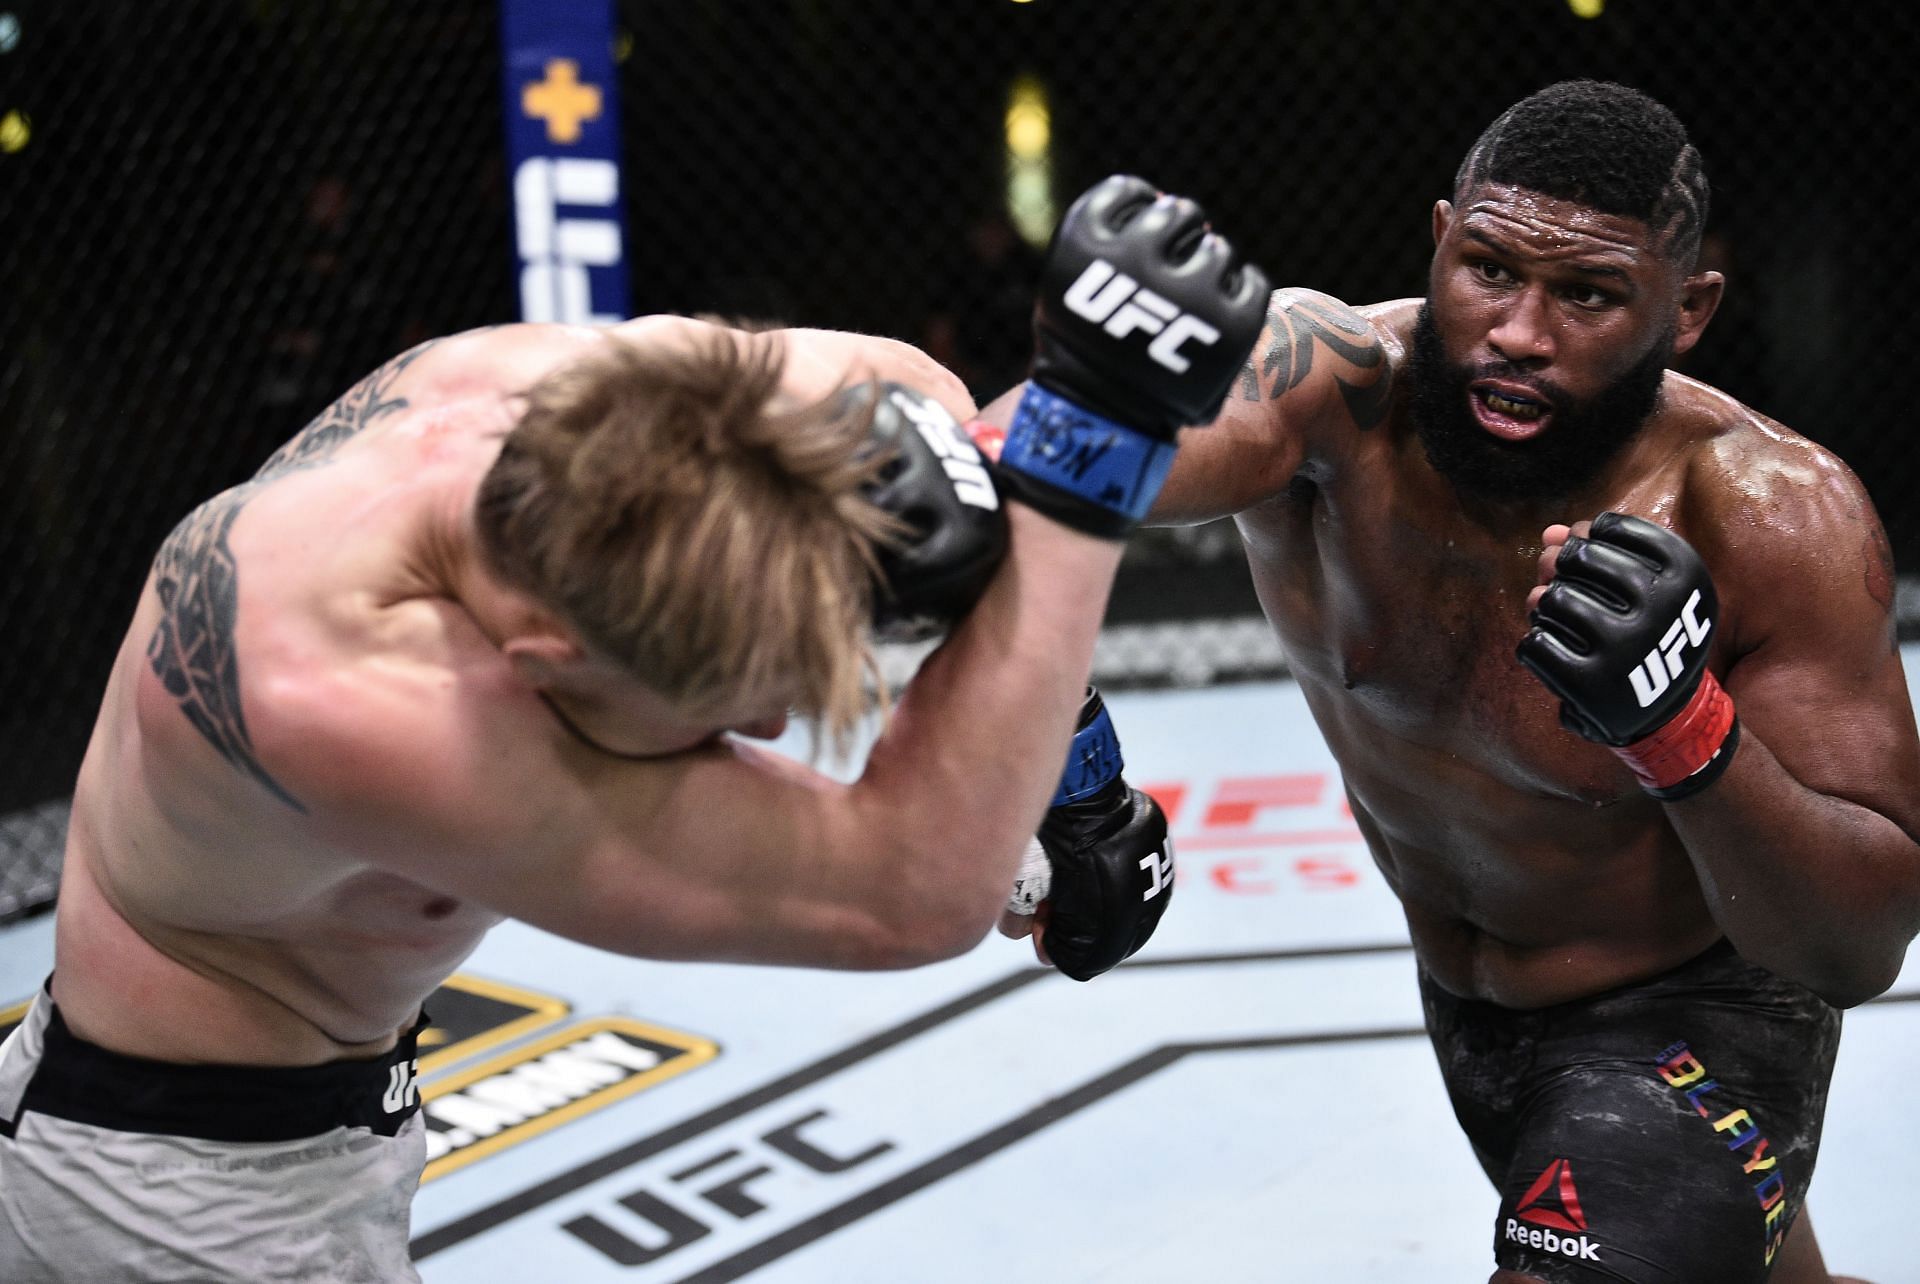 Contrary to what some fans believe, Curtis Blaydes is capable of producing fireworks in the octagon